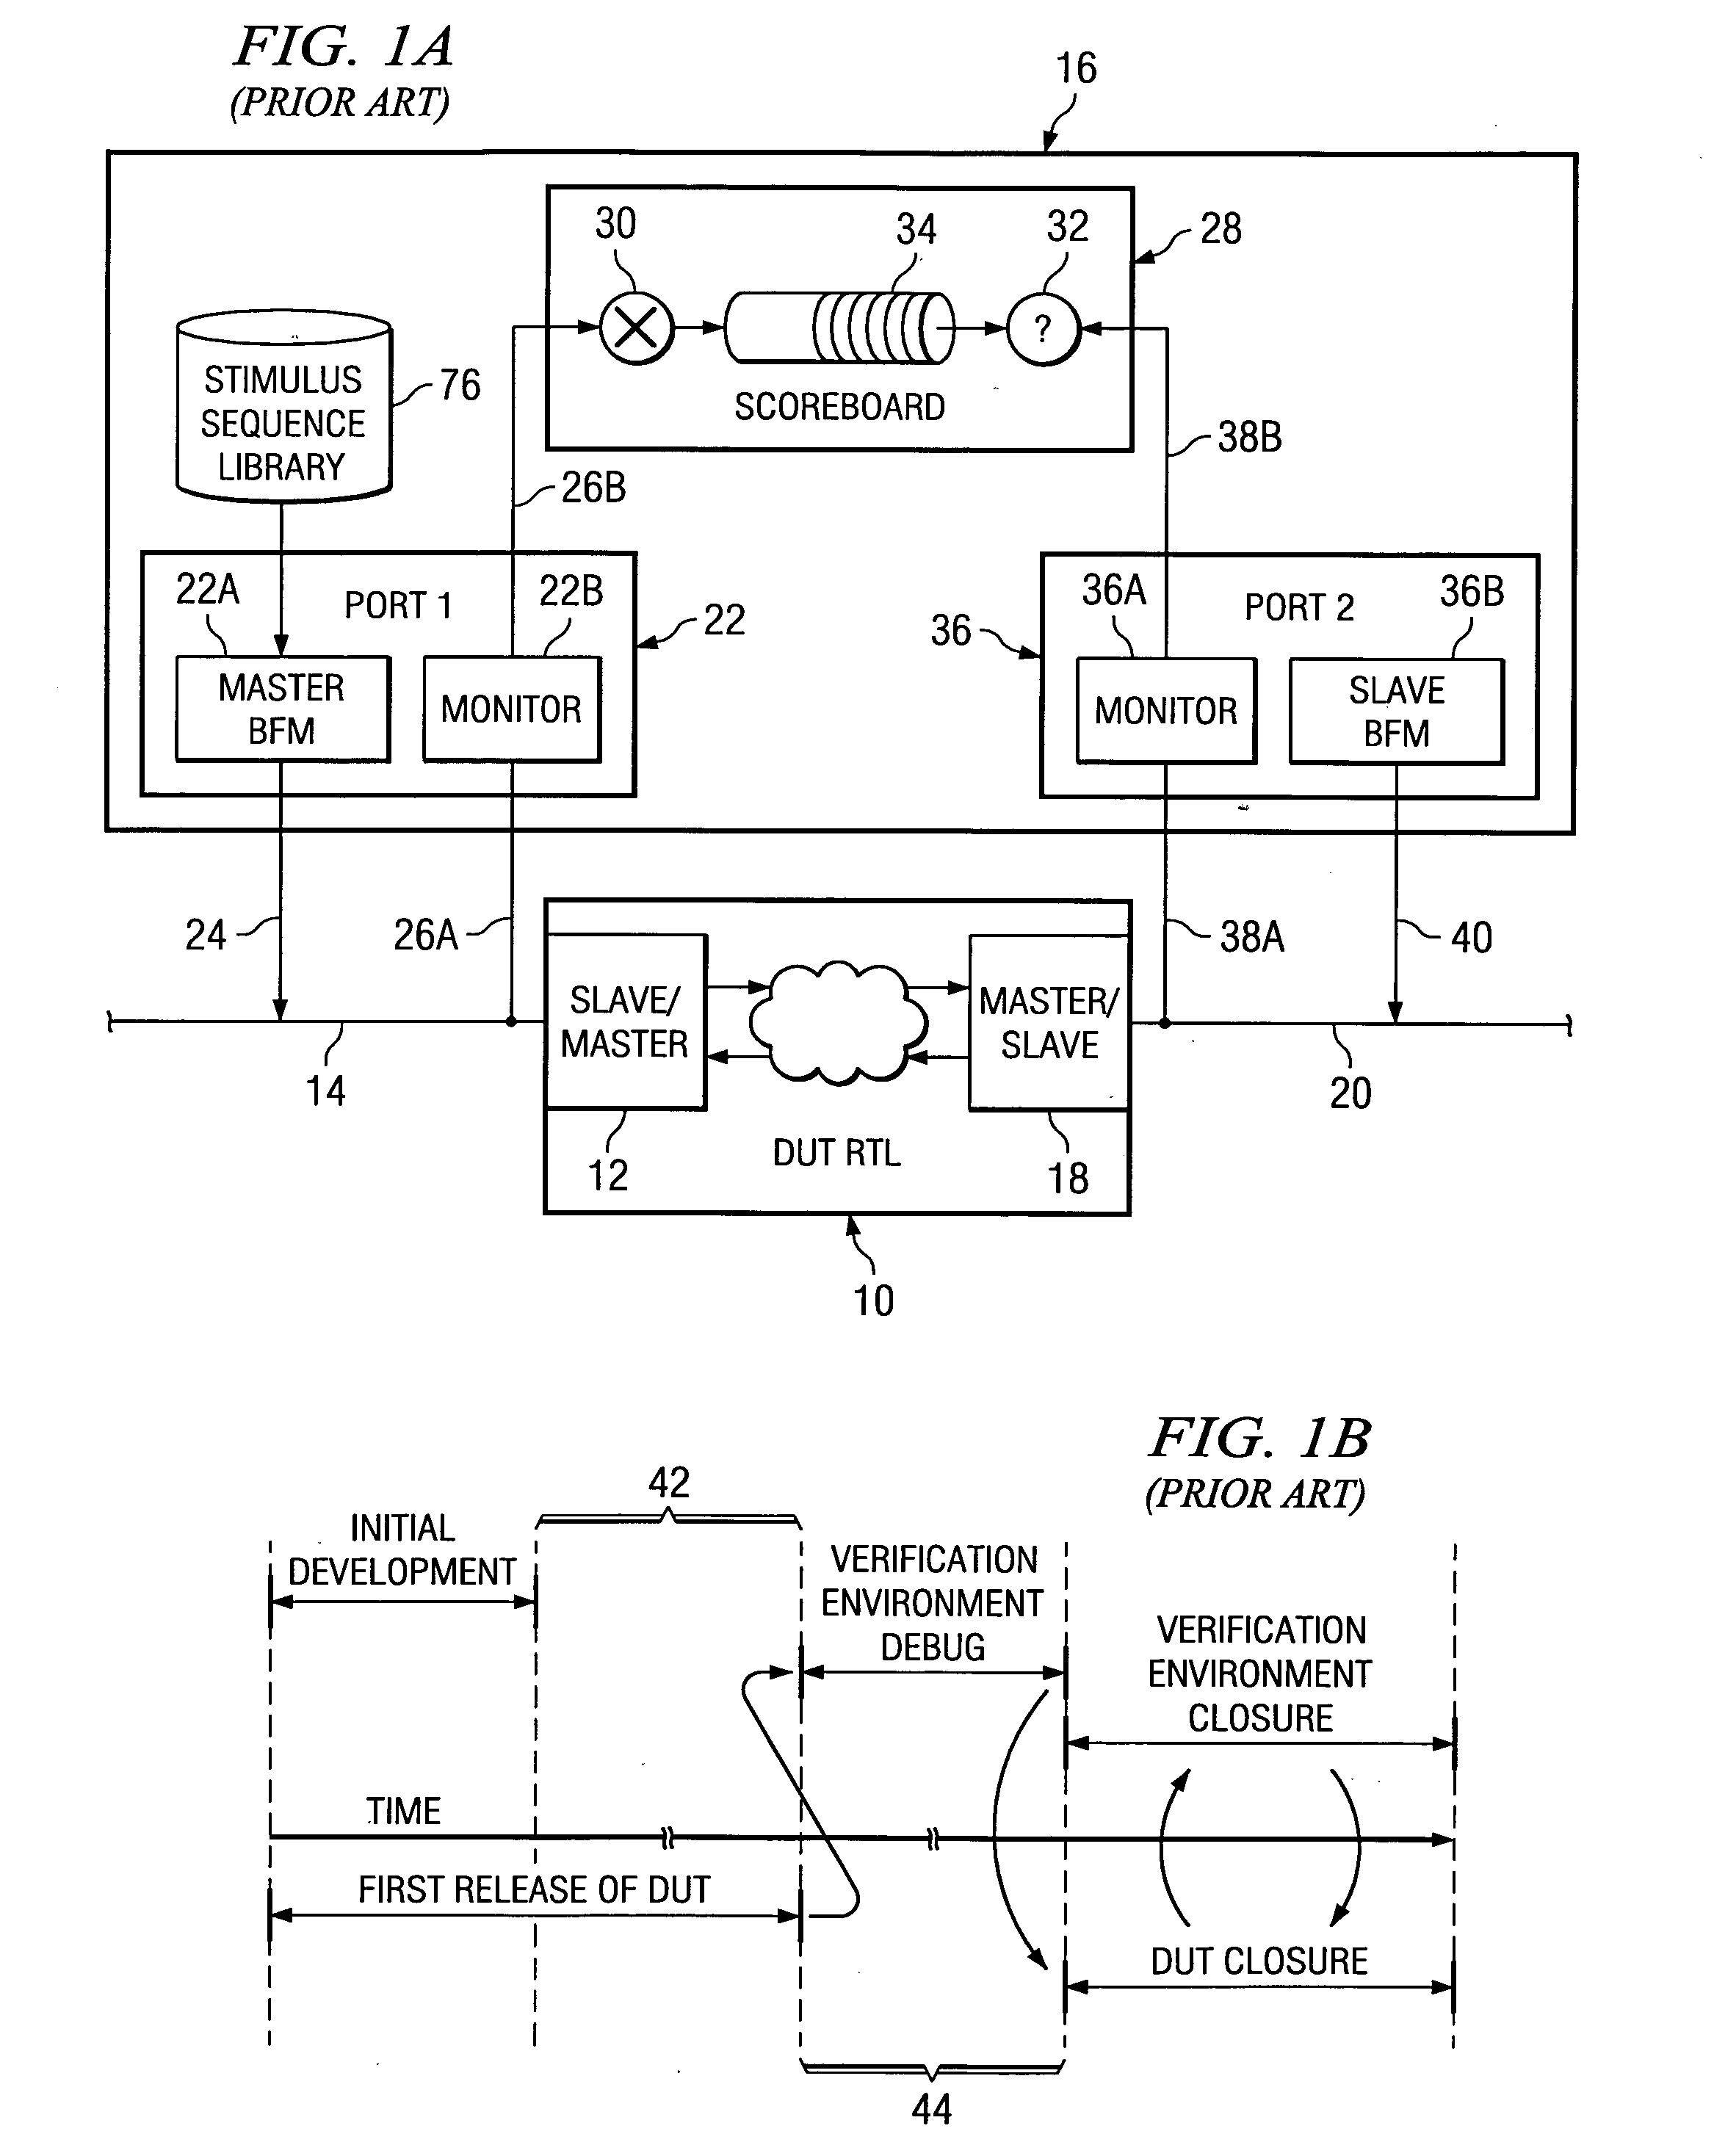 Method of verifying circuitry used for testing a new logic component prior to the first release of the component